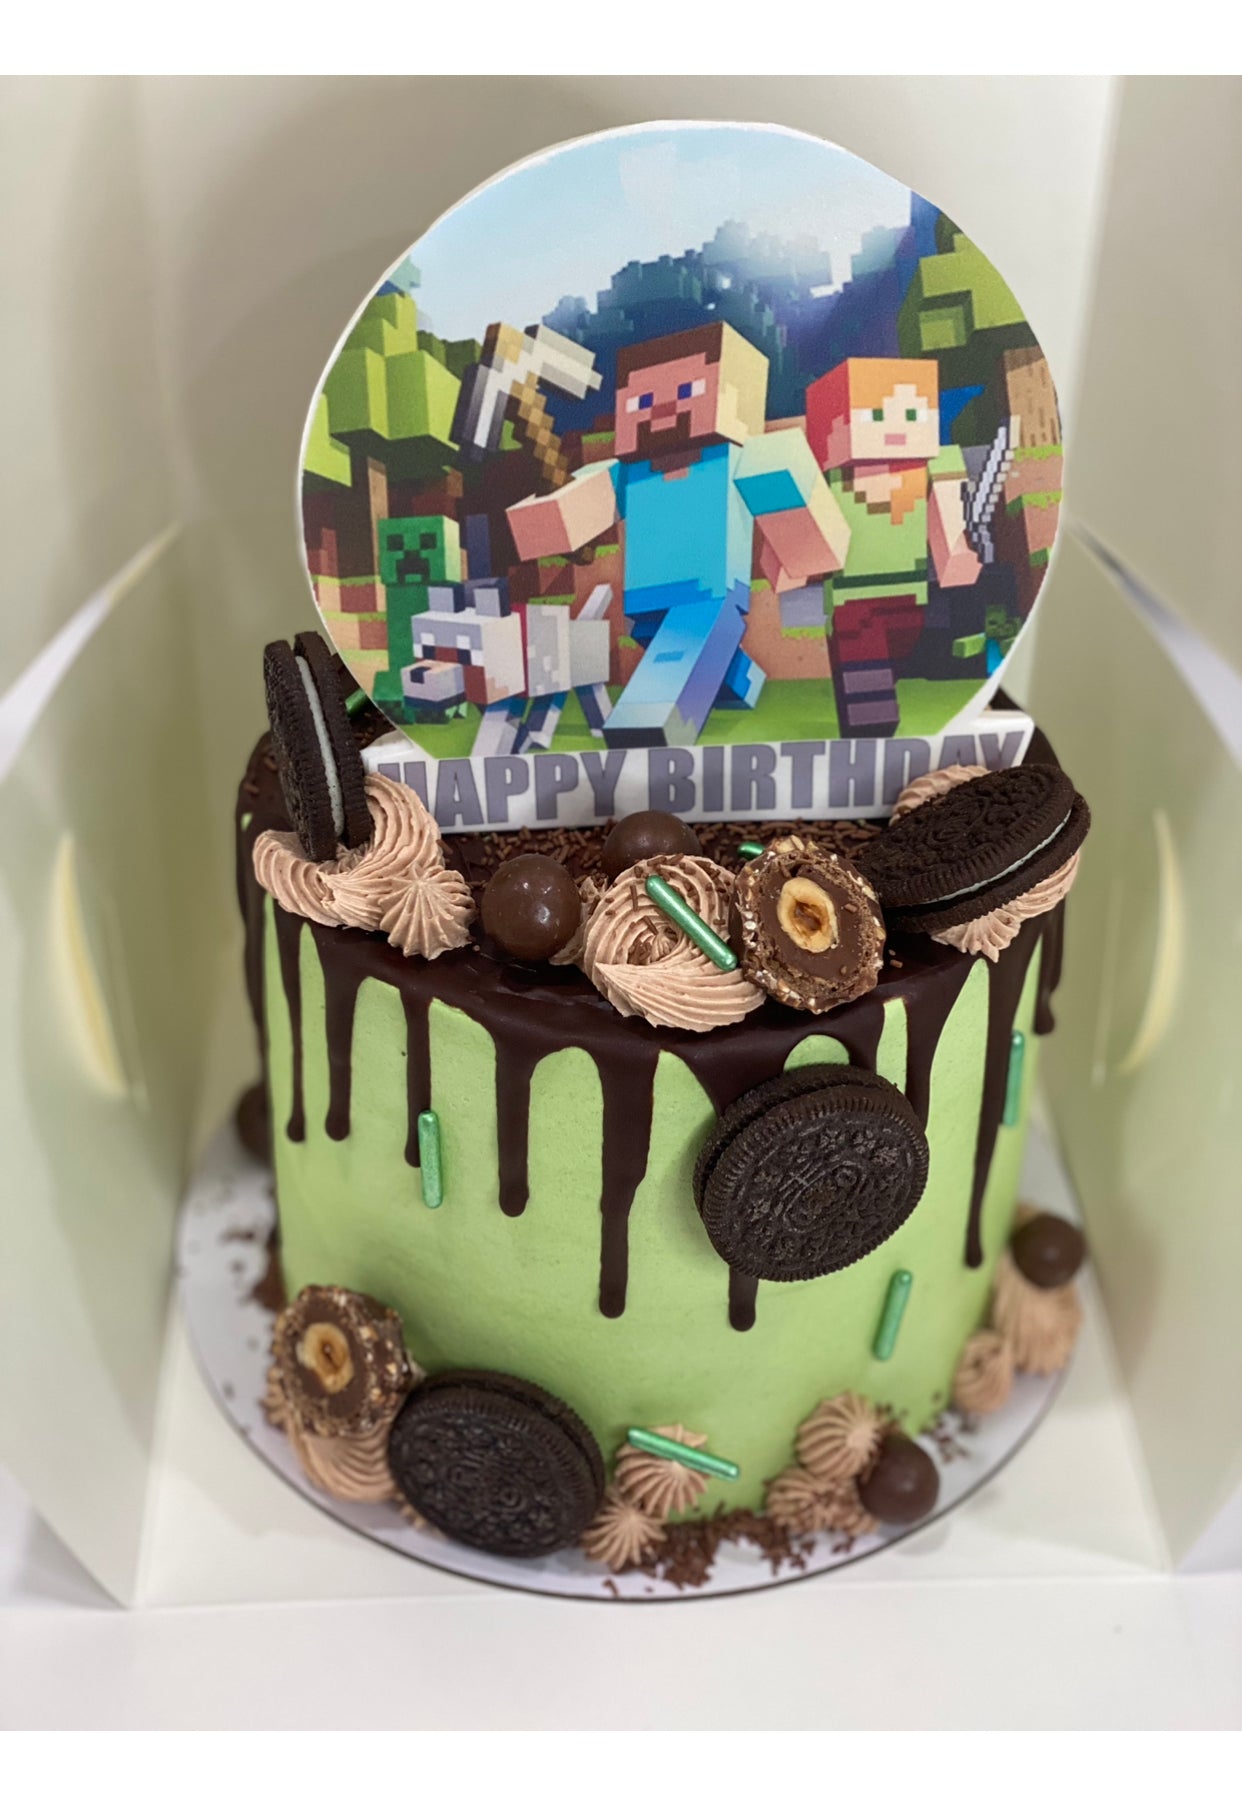 Sugar Cloud Cakes - Cake Designer, Nantwich, Crewe, Cheshire | A Minecraft  Themed 8th Birthday Cake for Oliver, Crewe